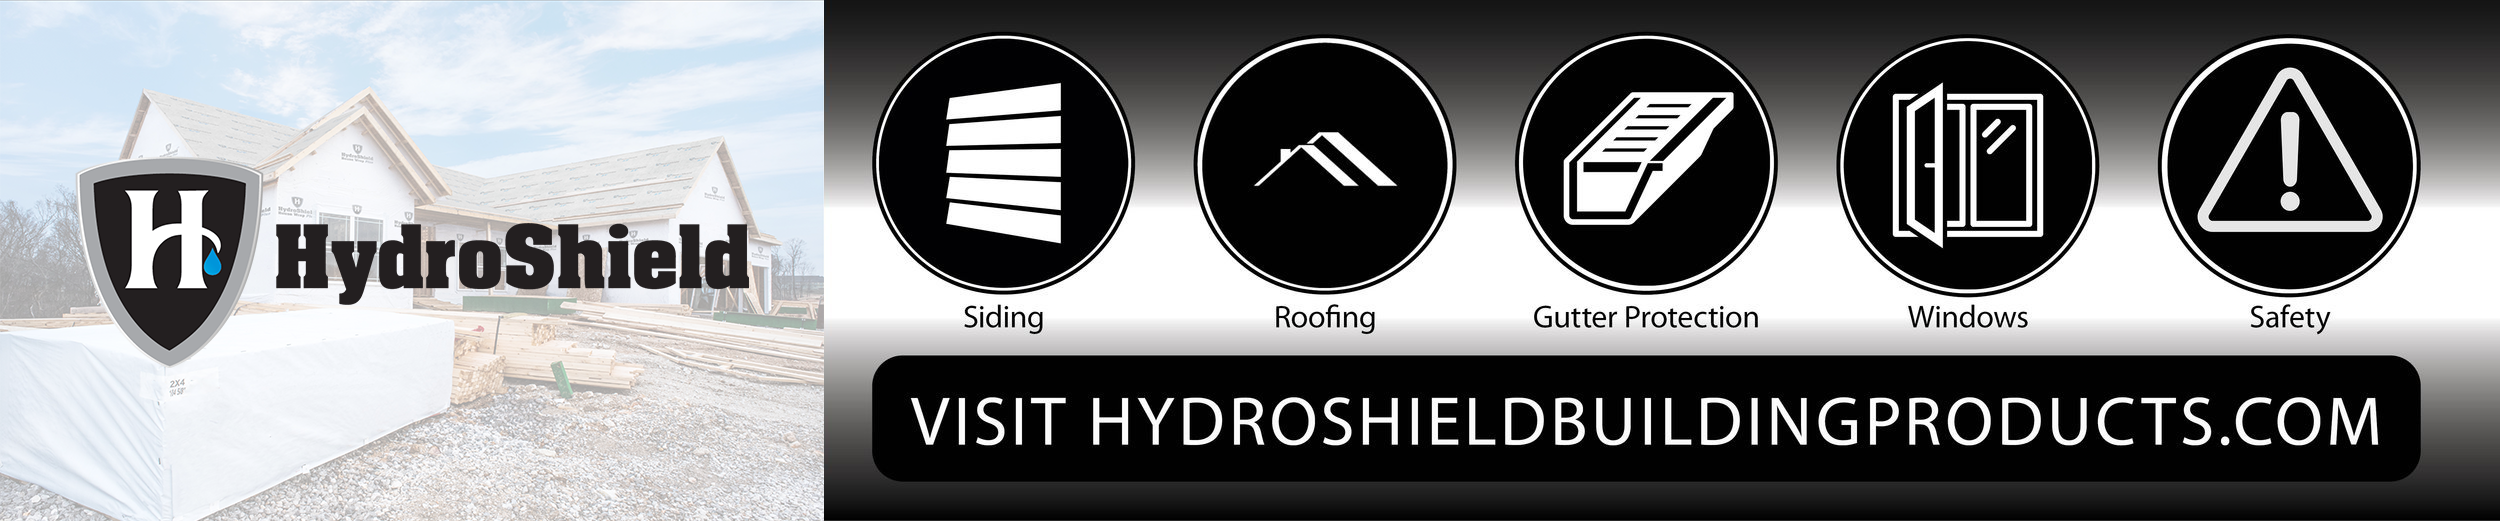 Hydroshield Building Products 